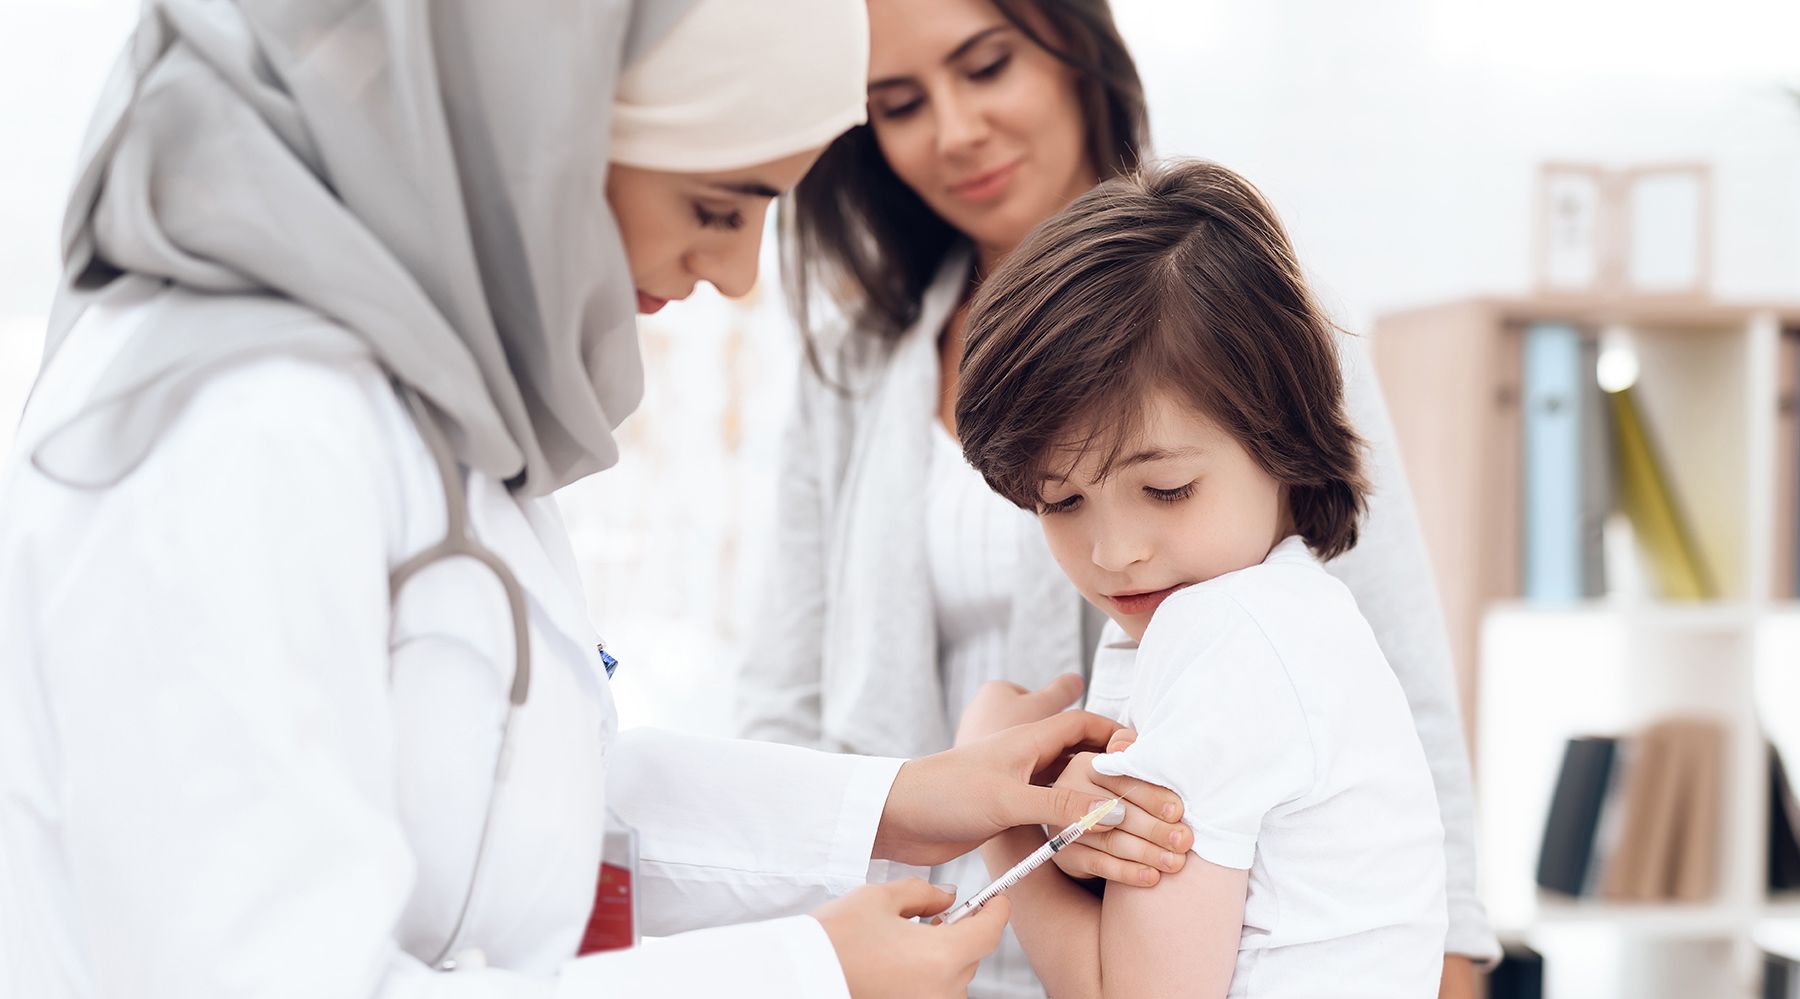 A challenging flu season ahead for the UAE?